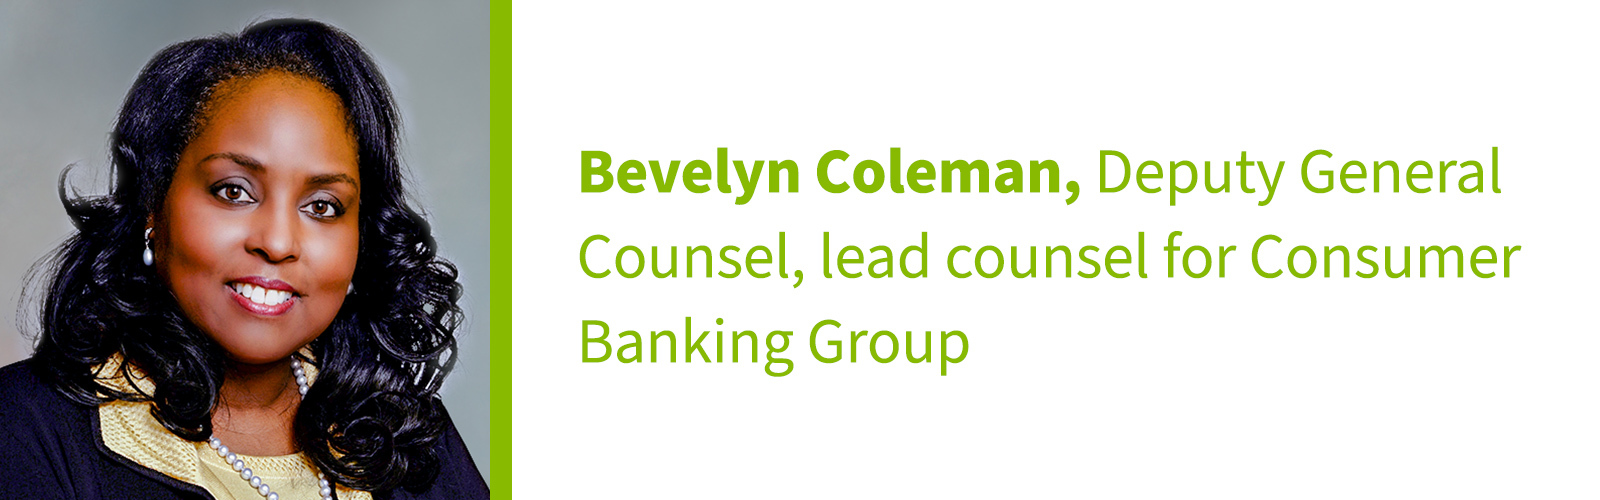 Bevelyn Coleman headshot and title